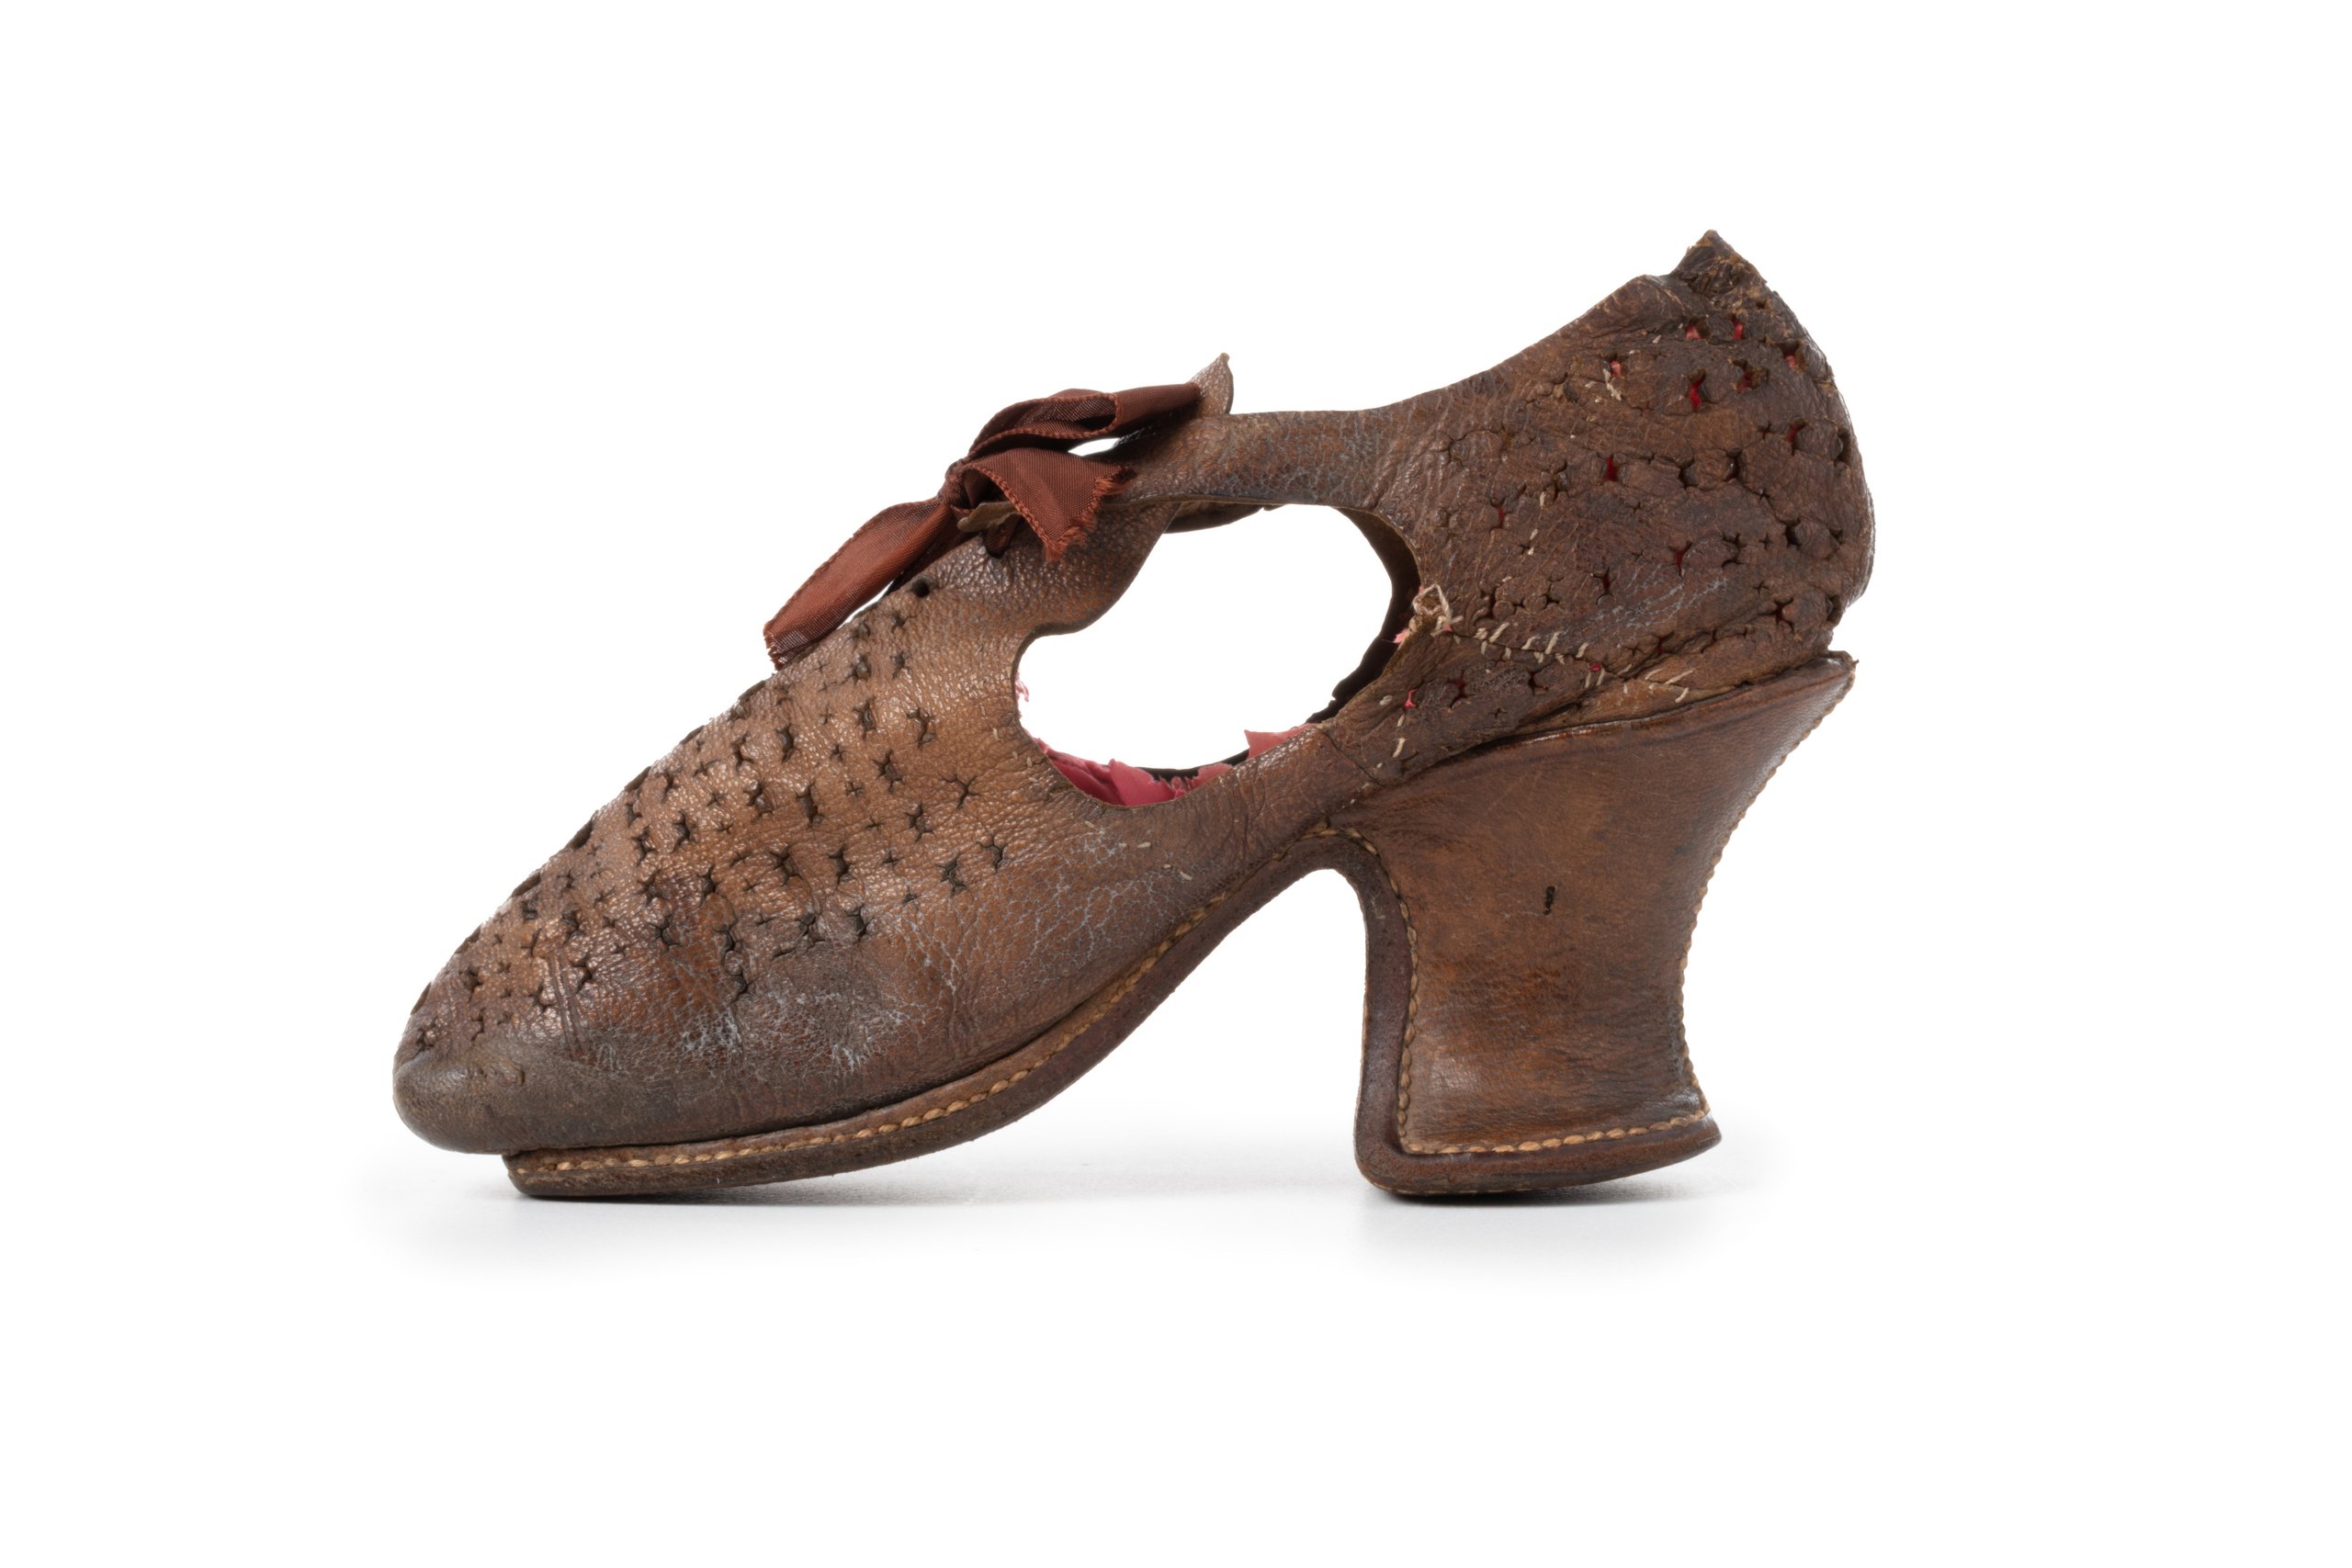 Womens tie shoe from the Joseph Box collection